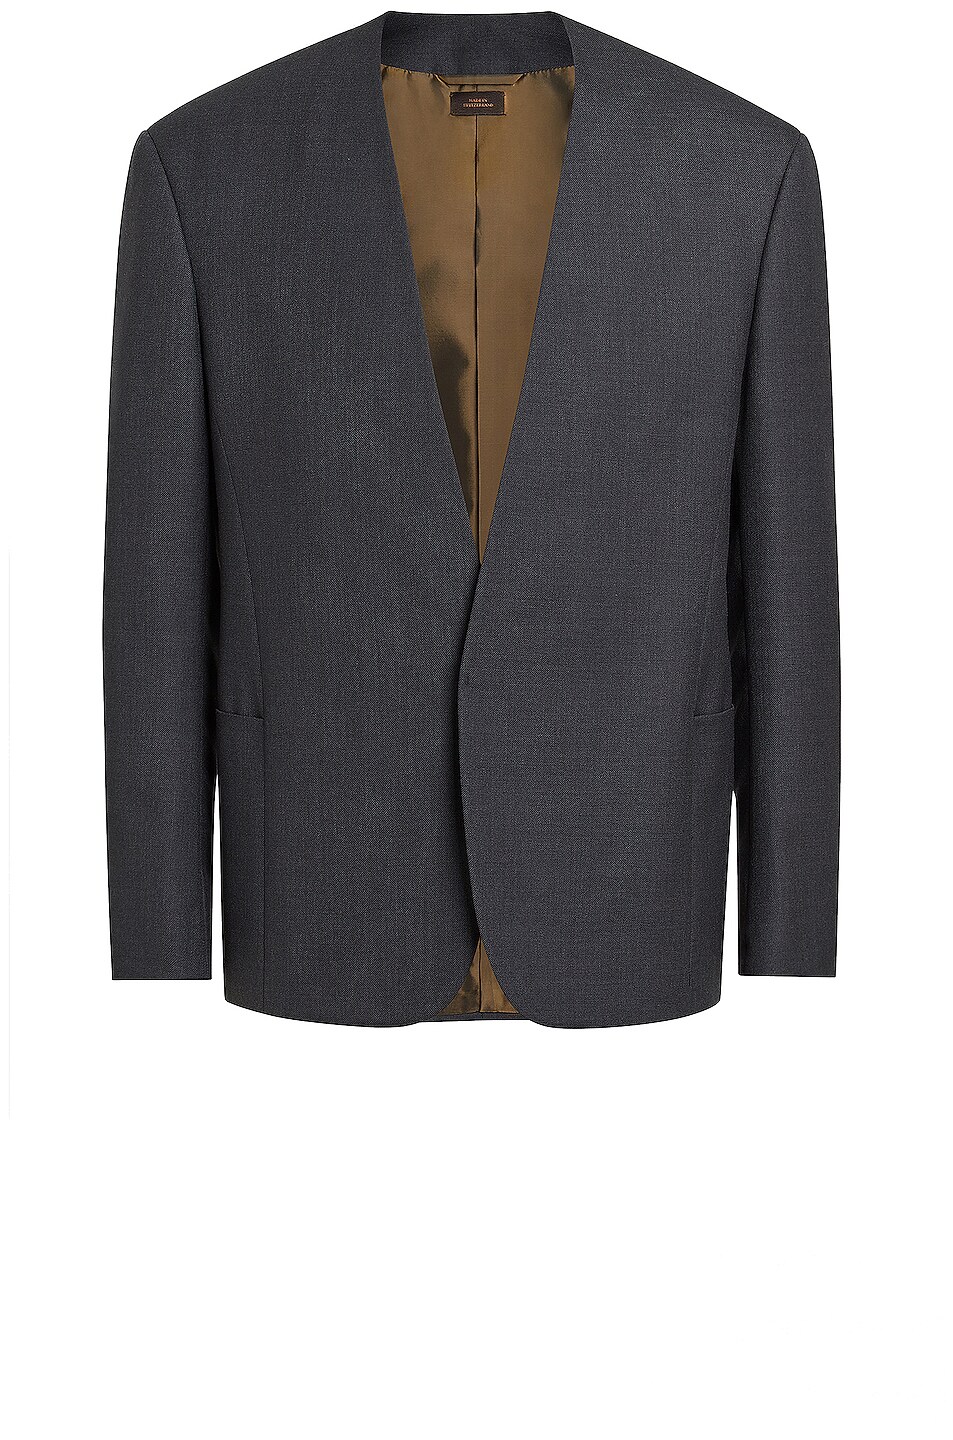 Image 1 of Fear of God Exclusively for Ermenegildo Zegna Single Breasted Jacket in Anthracite